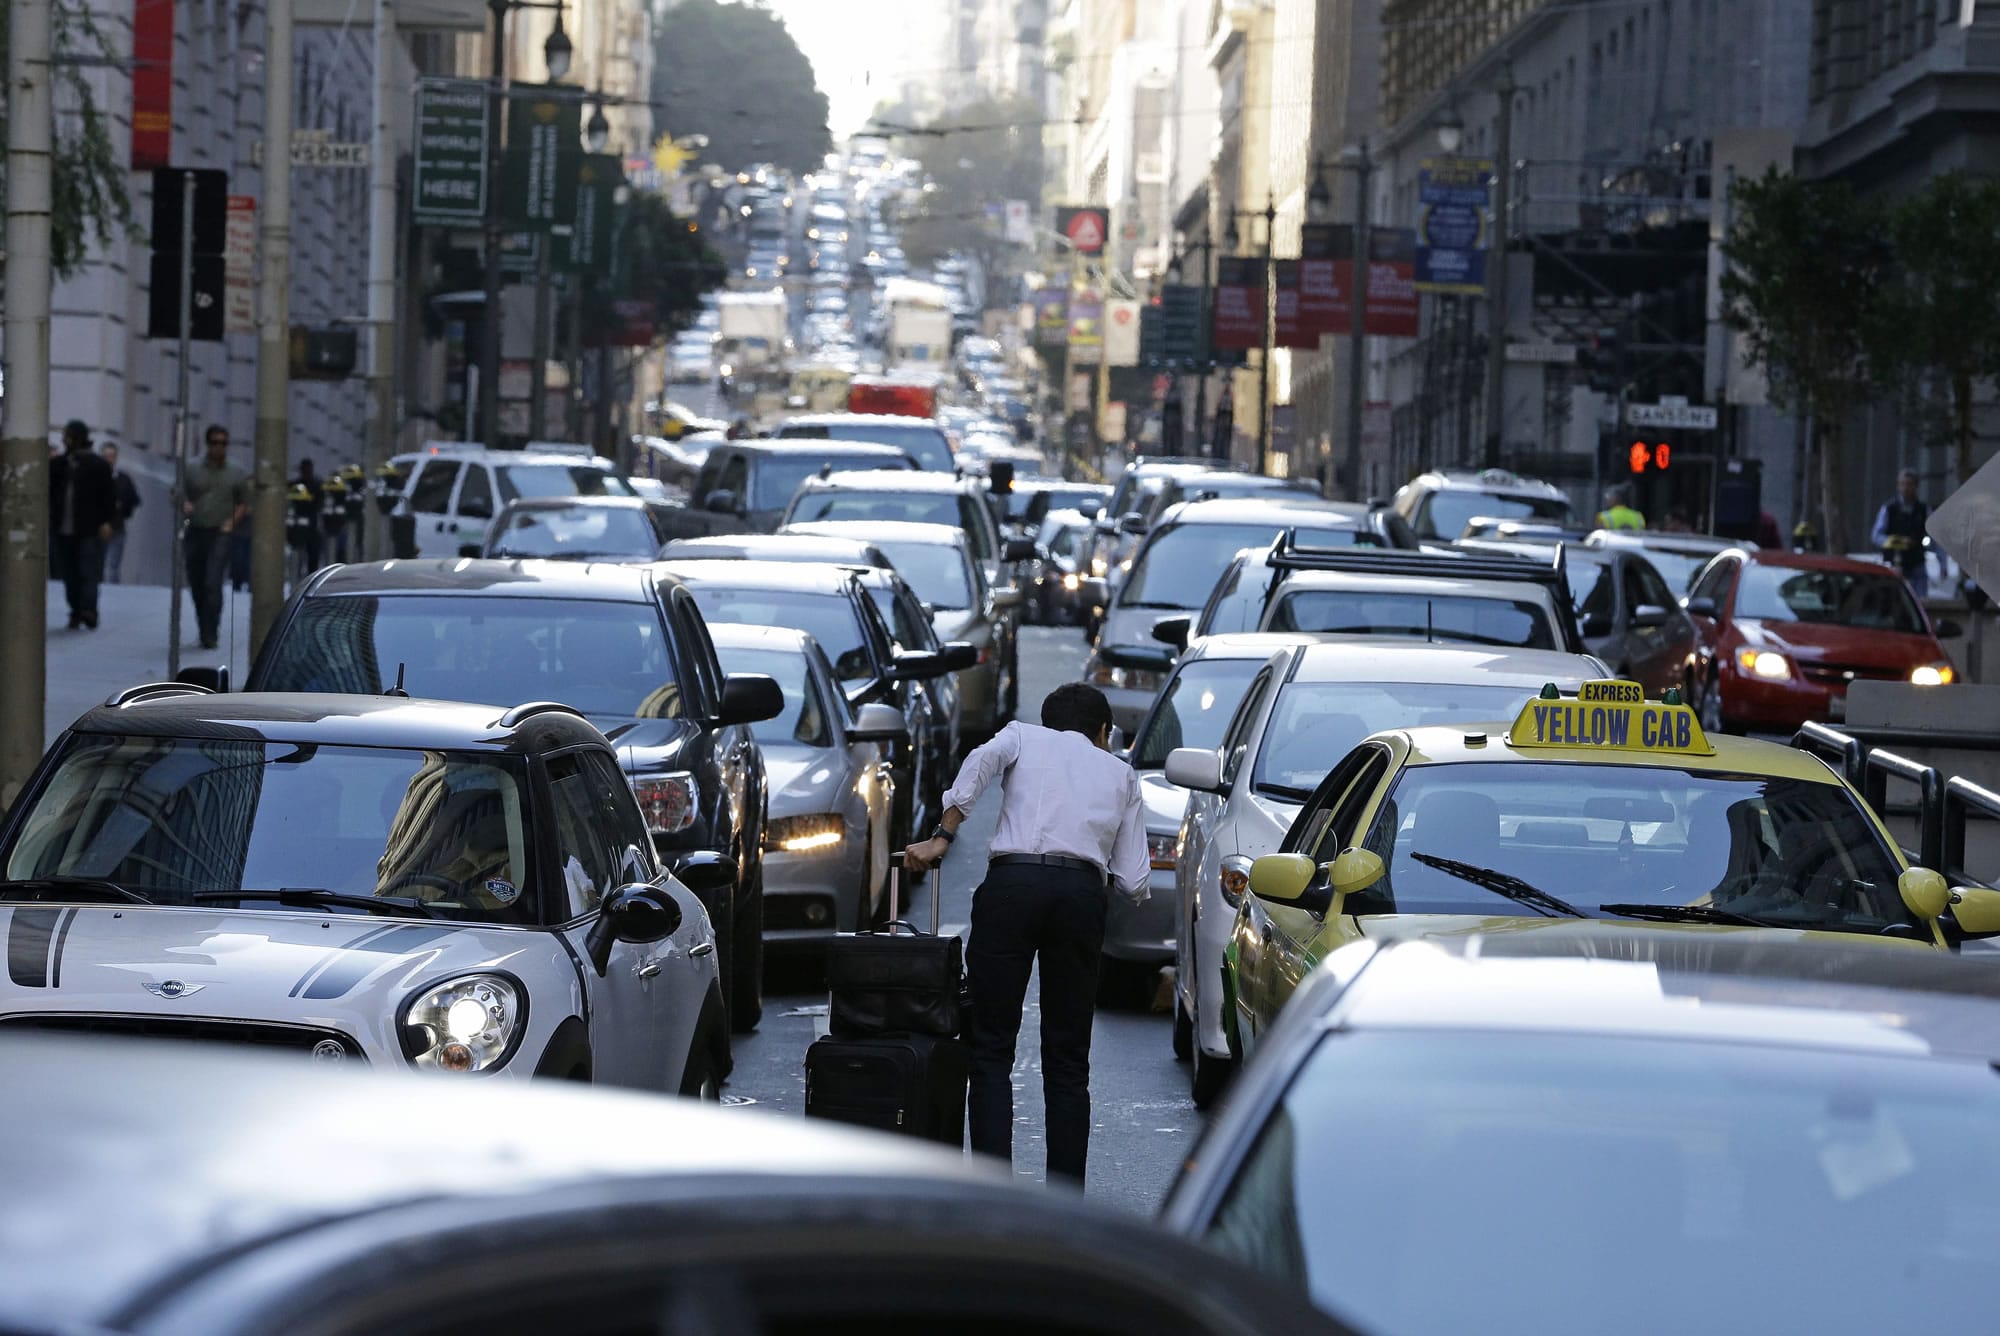 Photos by ERIC RISBERG/Associated Press
With the Bay Area Rapid Transit system on strike, traffic is backed up for blocks on Bush Street, leading to an artery of the San Francisco-Oakland Bay Bridge, during the evening commute Friday in San Francisco.